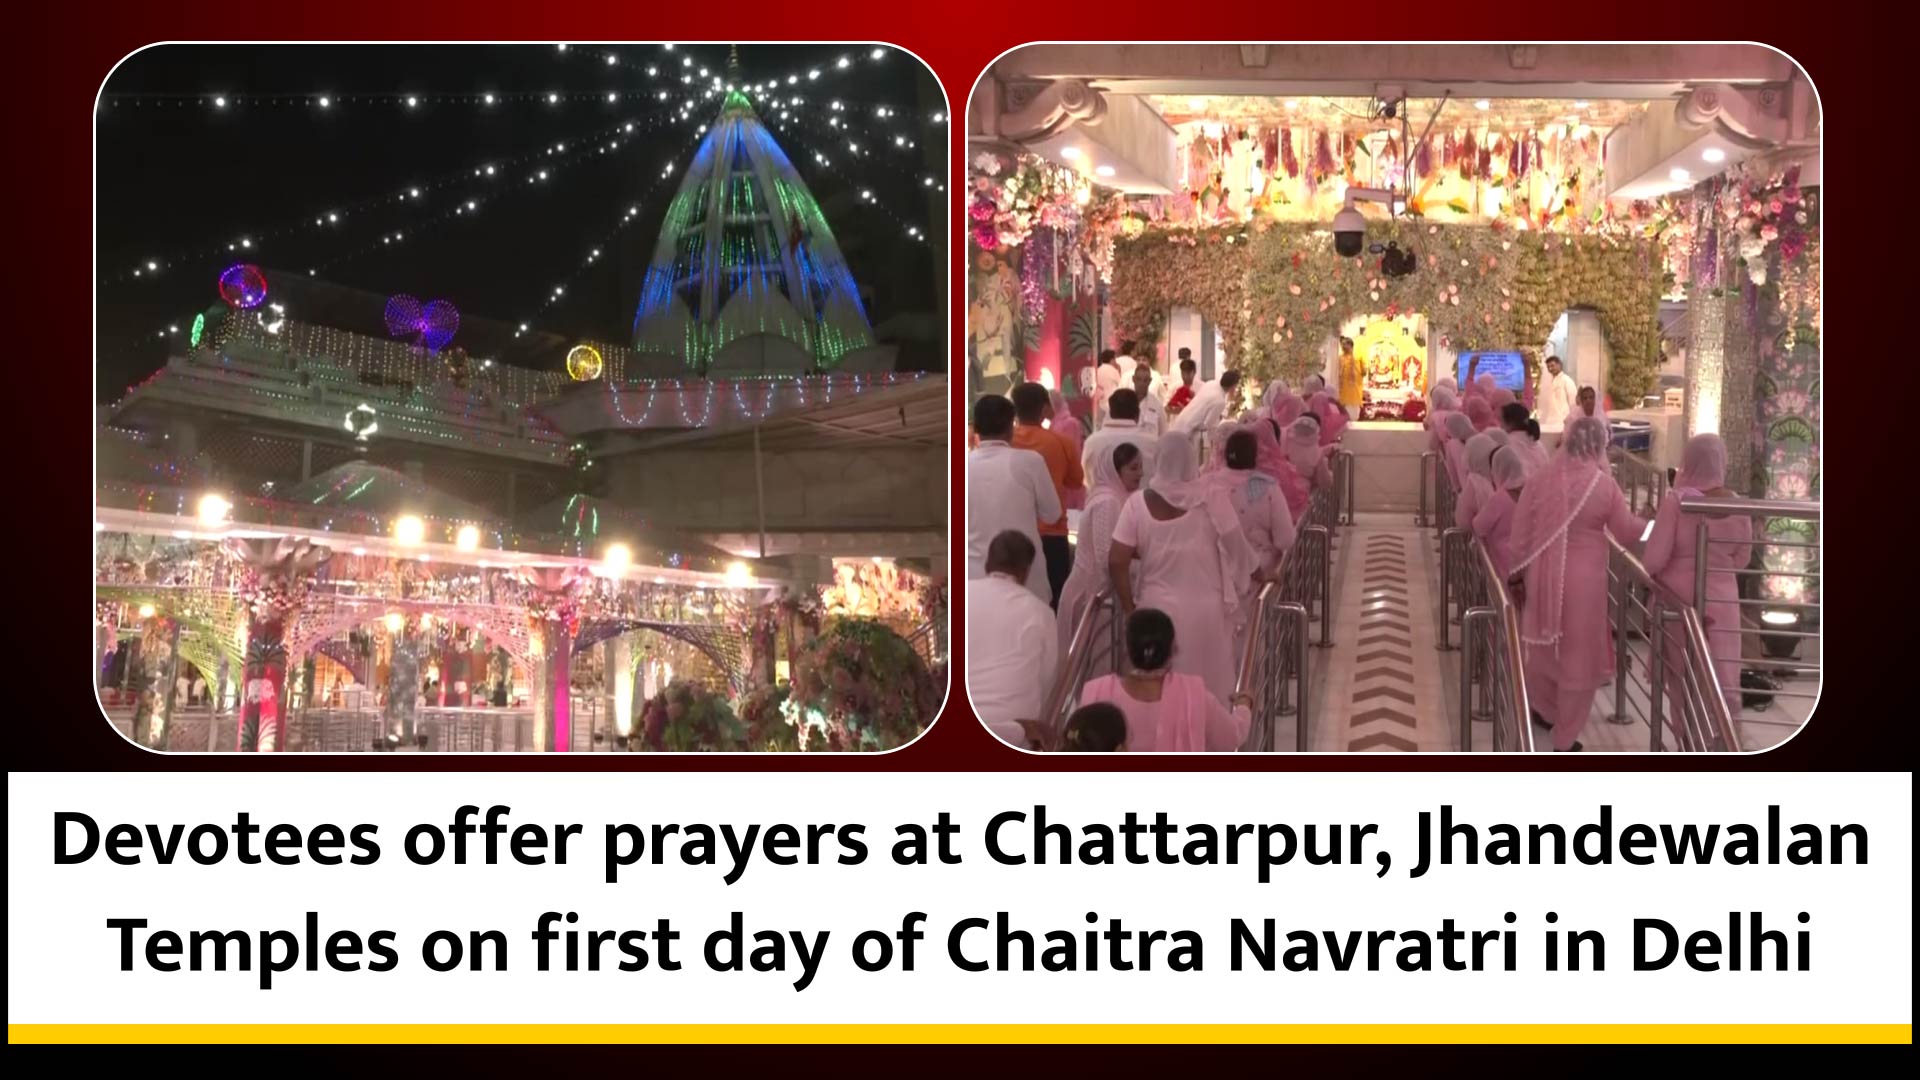 Devotees offer prayers at Chattarpur, Jhandewalan Temples on first day of Chaitra Navratri in Delhi